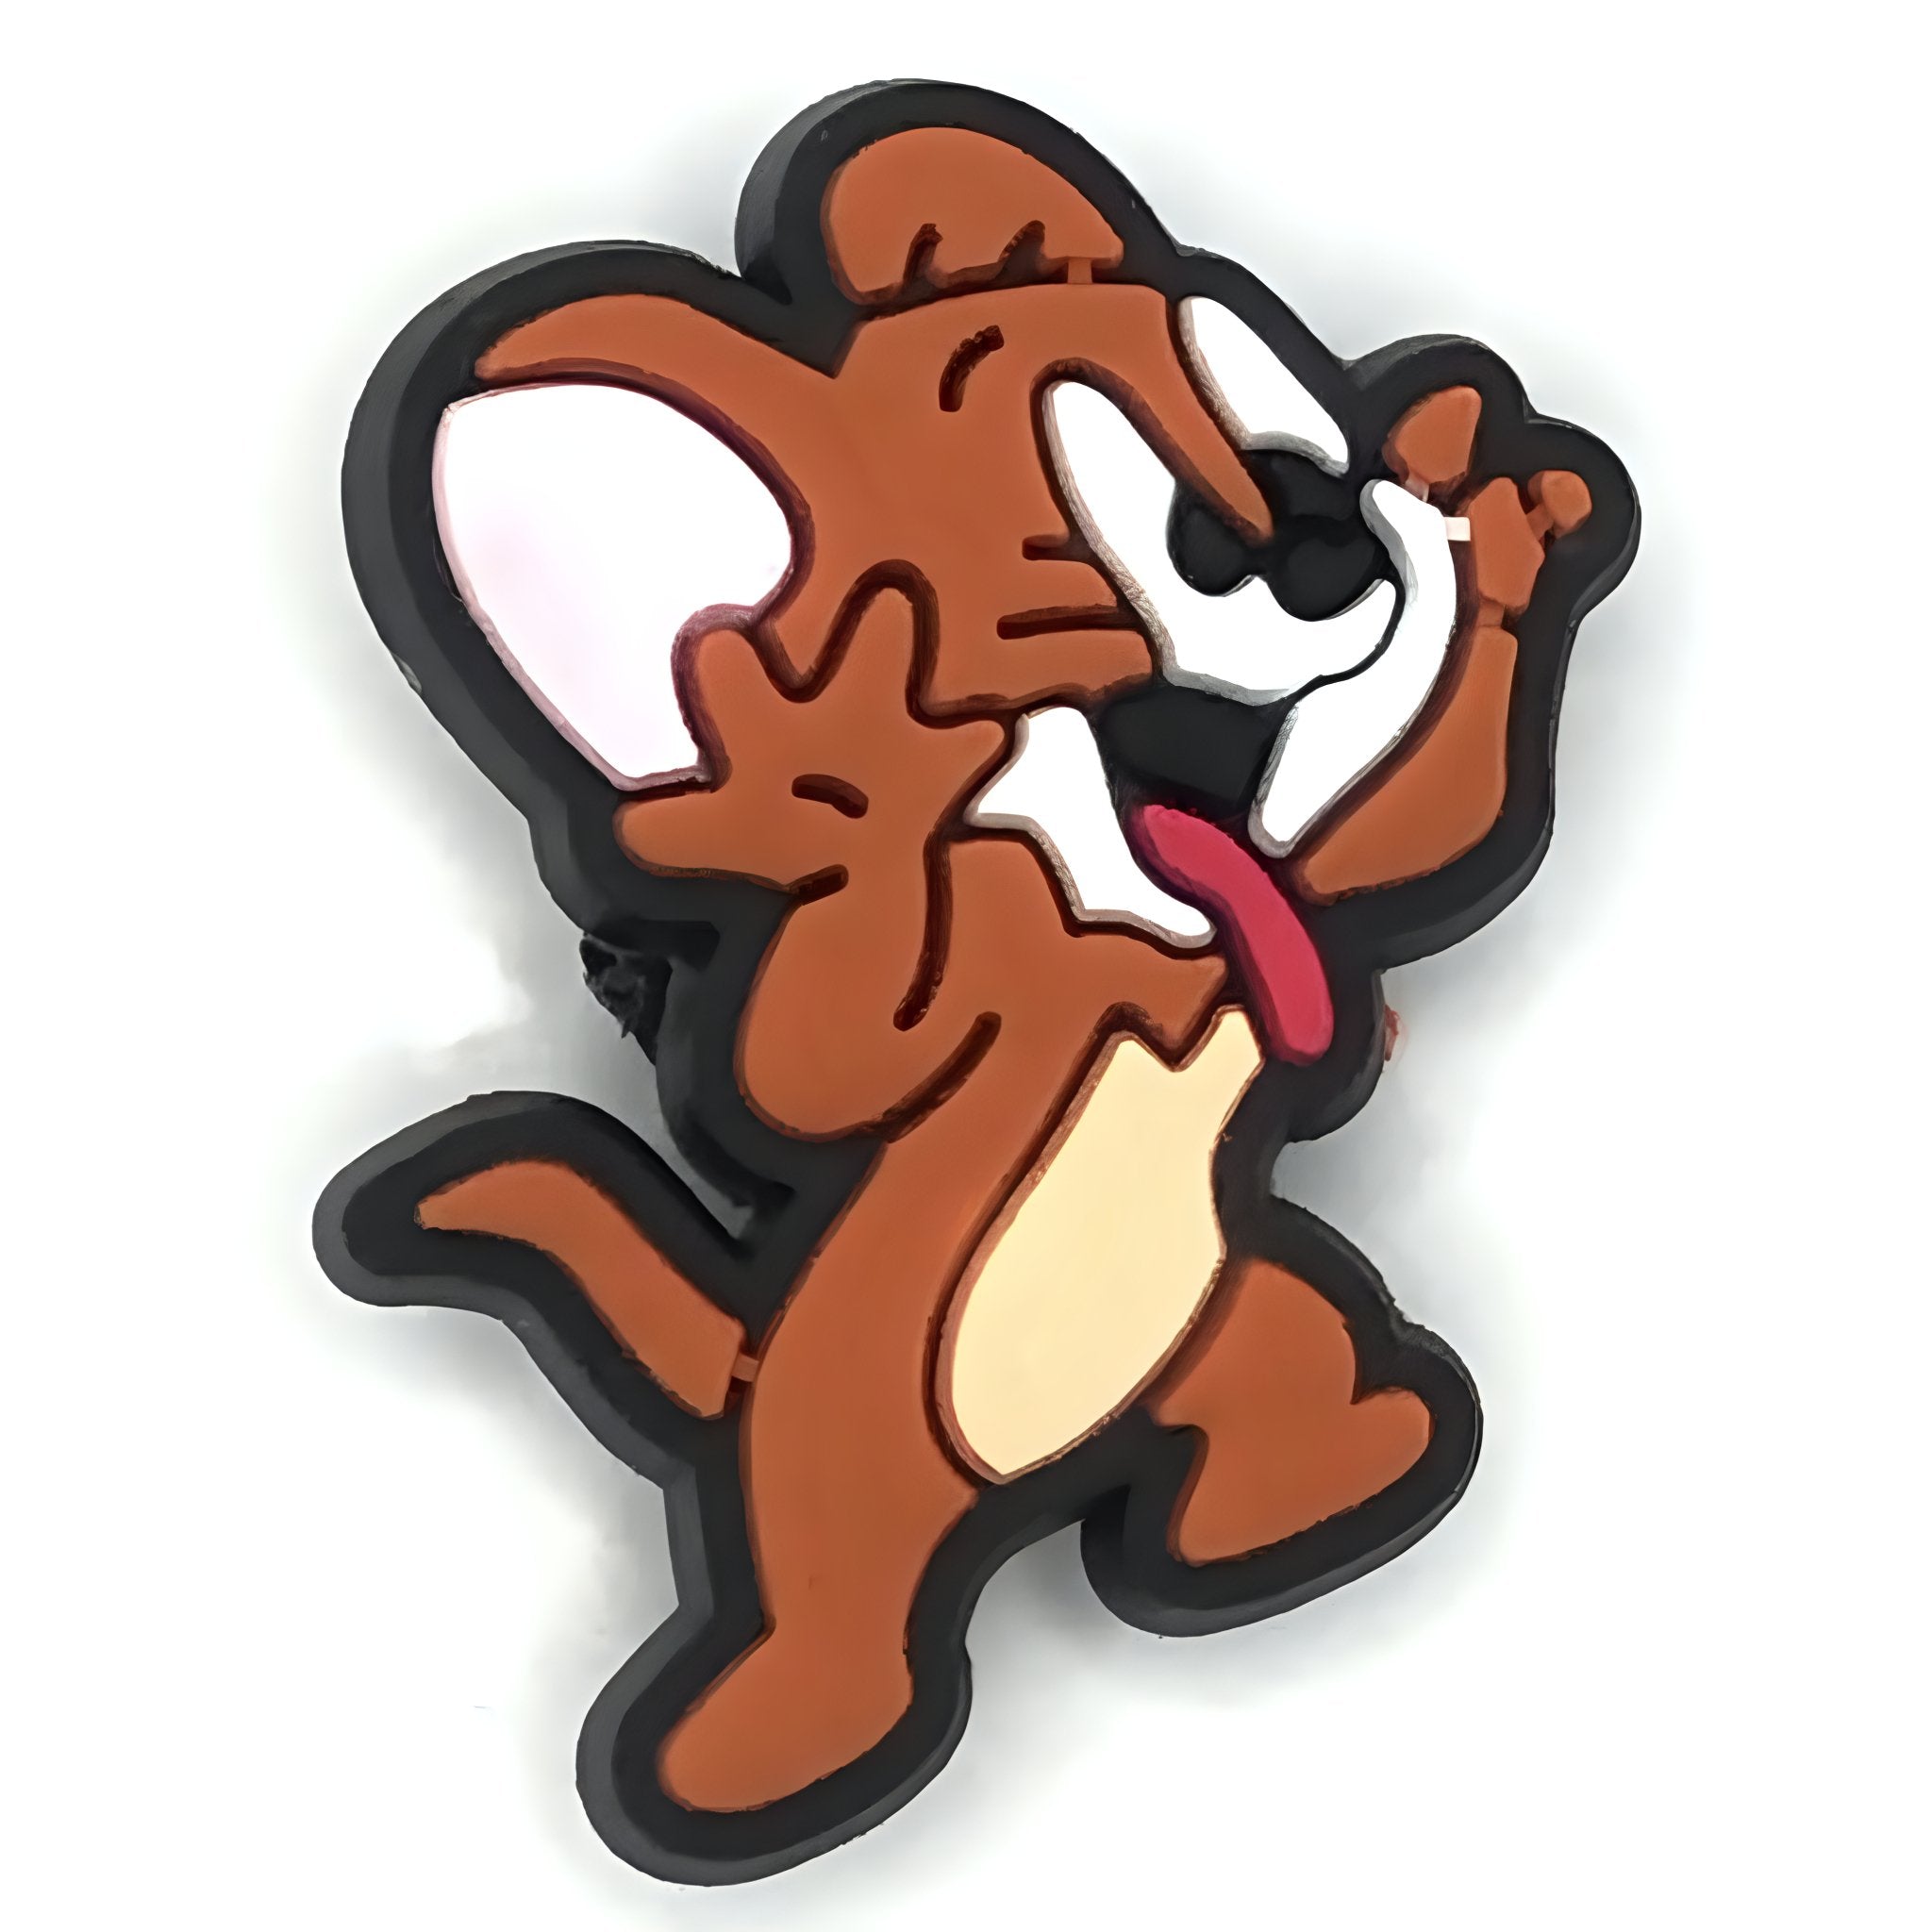 "Jerry Charm 🐭😄: Classic Cartoon Style!" - Questsole